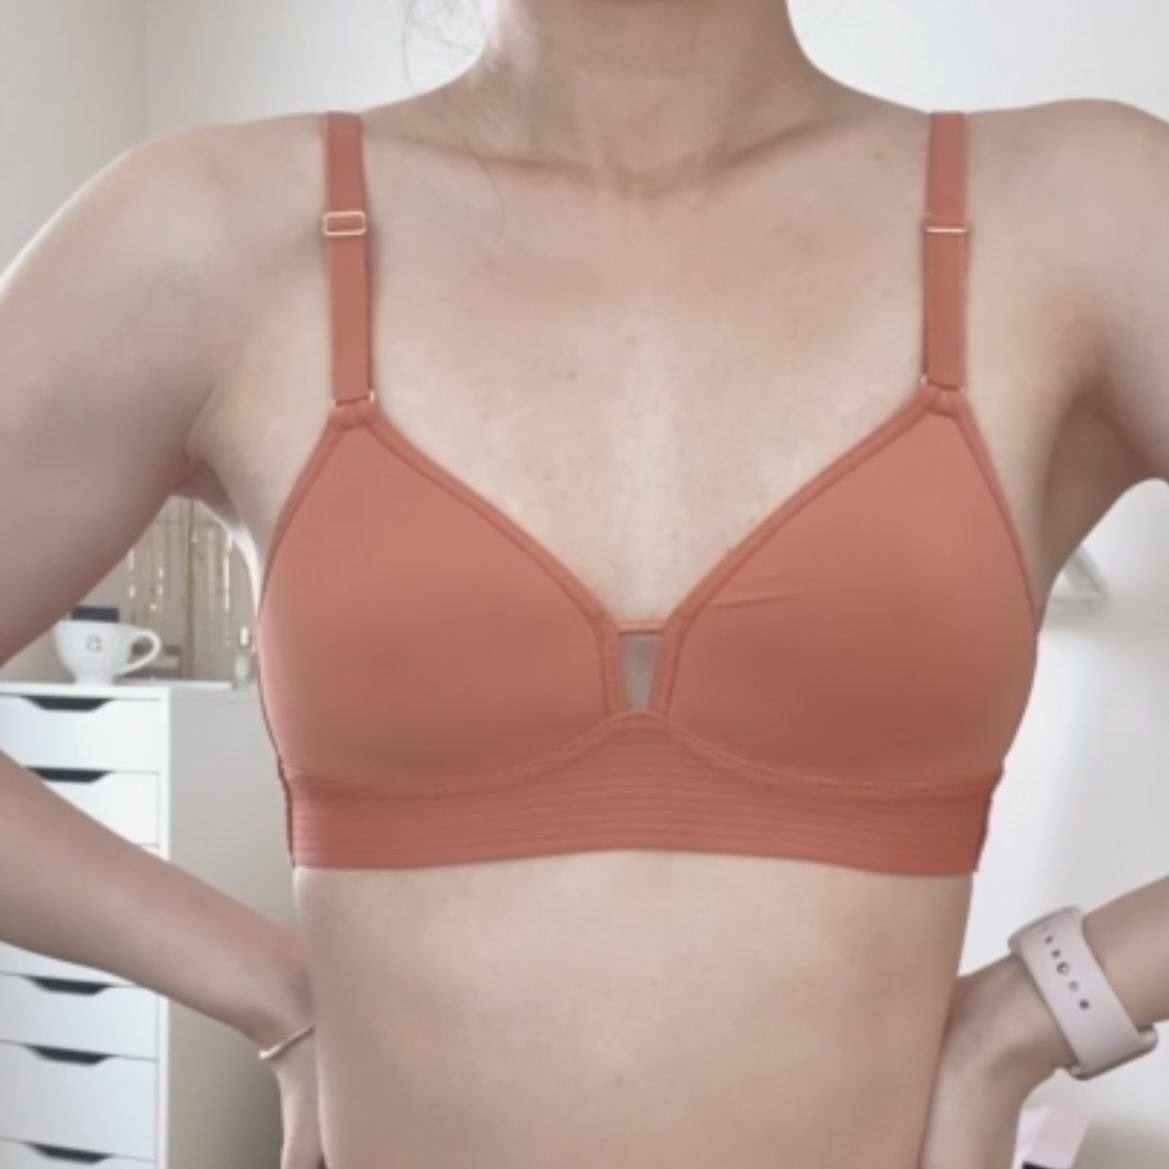 I'm here to inform you that the best bra I've ever worn is 55% off